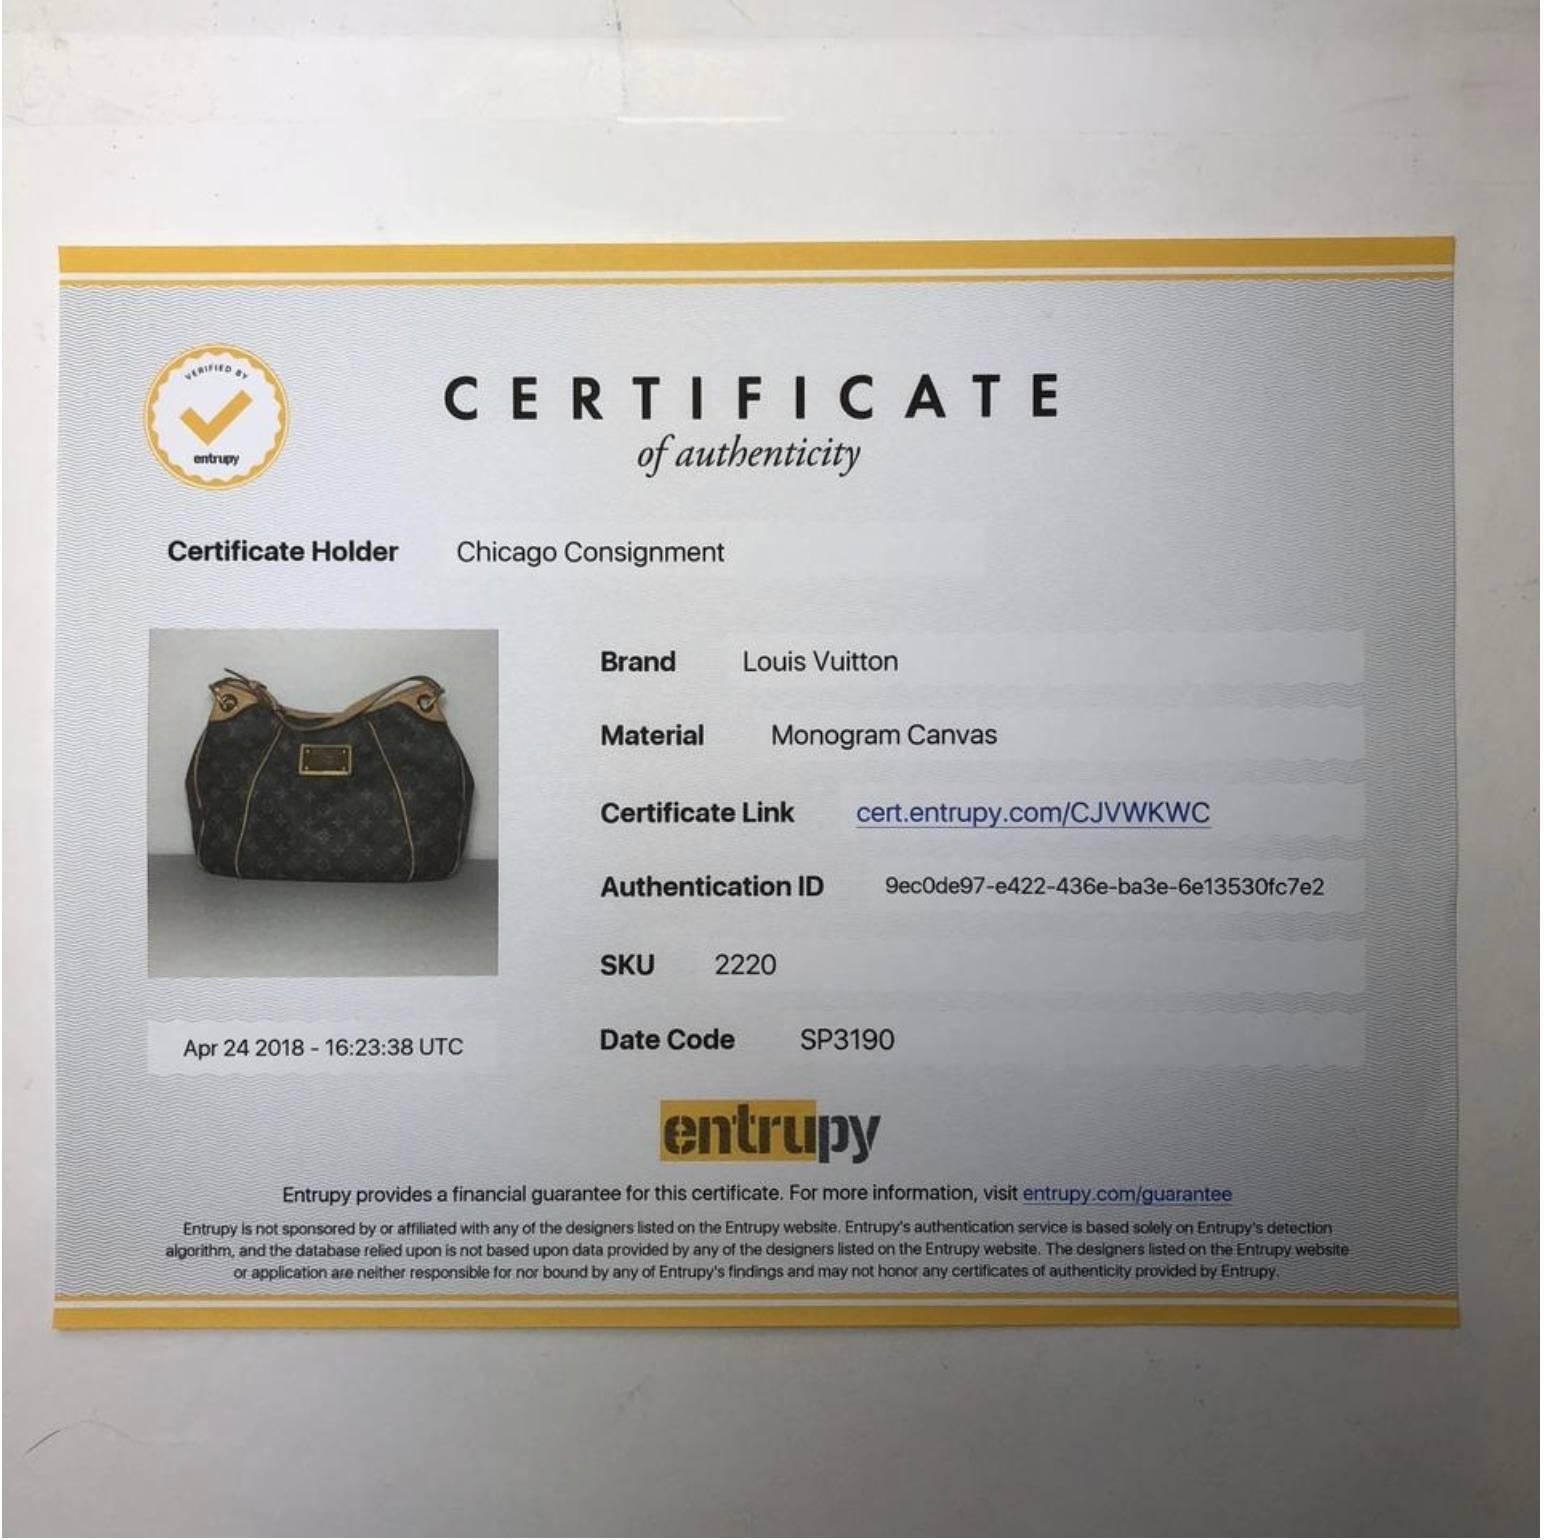 MODEL - Louis Vuitton Monogram Galliera PM

CONDITION - Very Good. Light vachette with watermarks on strap, no dryness and no cracking. Bright and shiny hardware with no tarnishing or chipping. No rips, holes, tears, stains or odors. Piece maintains